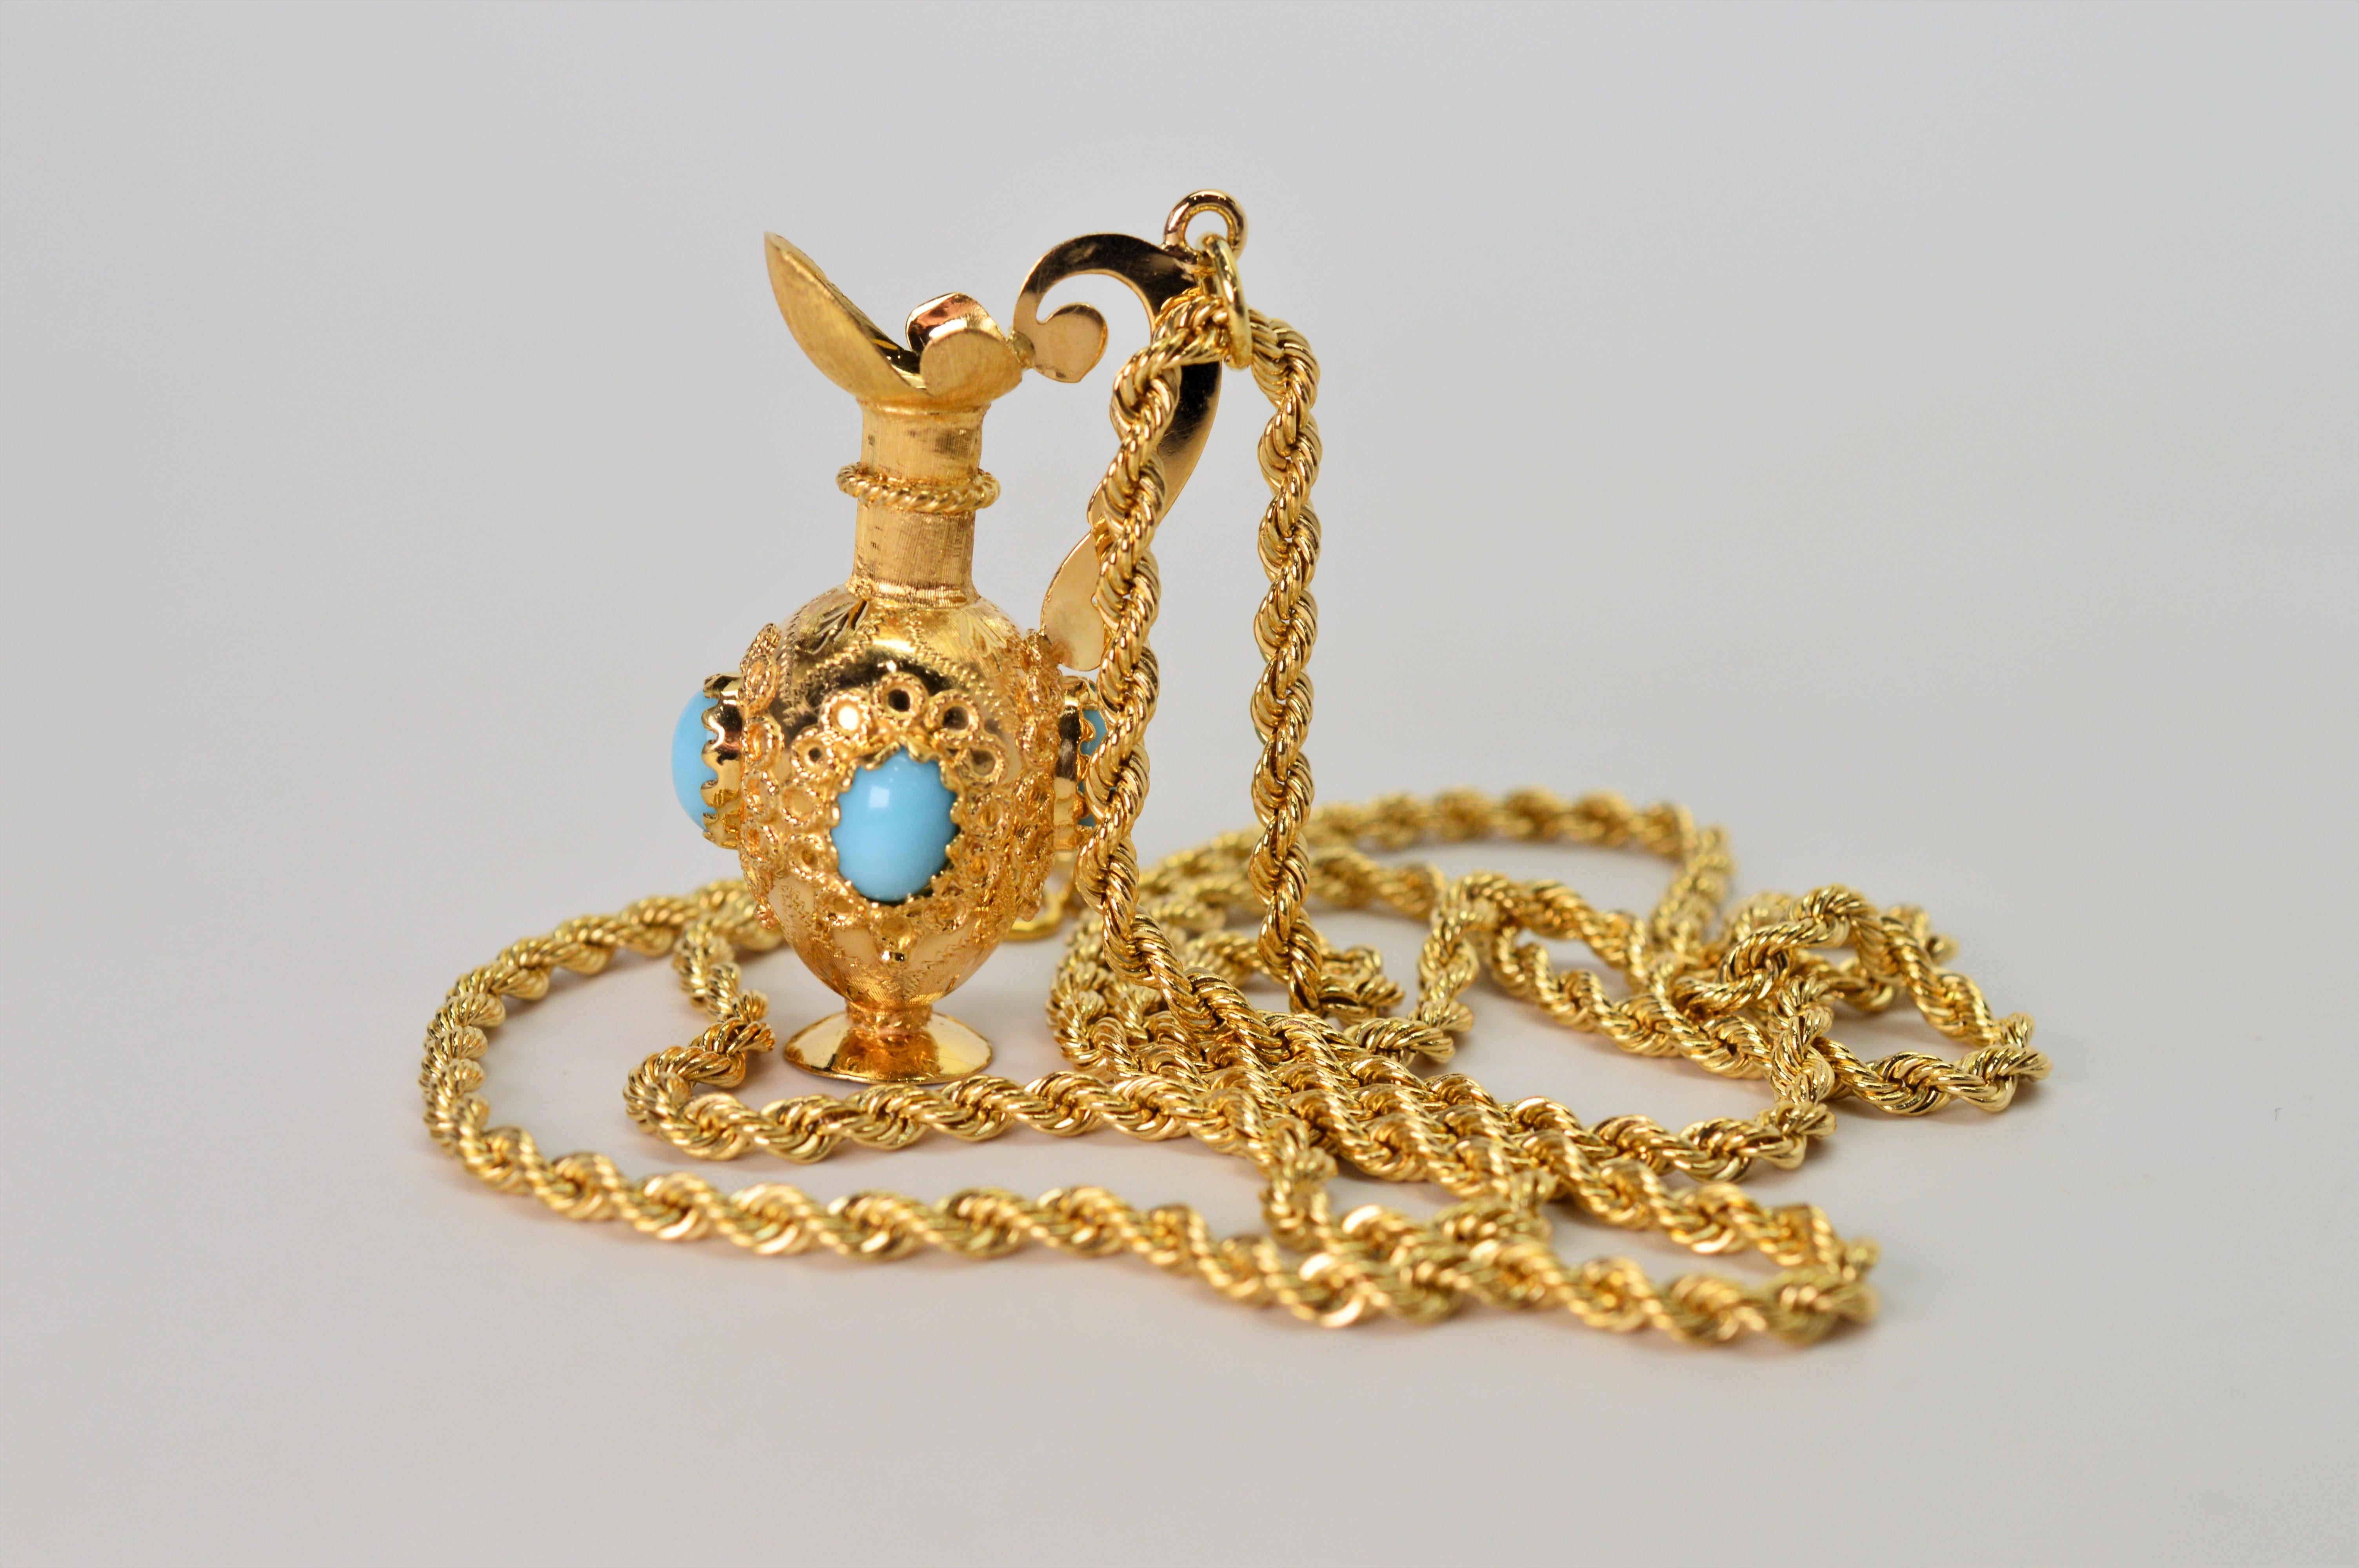 18K Vessel Charm Pendant w Turquoise Cabochon Accents 14K Yellow Gold Necklace In Excellent Condition For Sale In Mount Kisco, NY